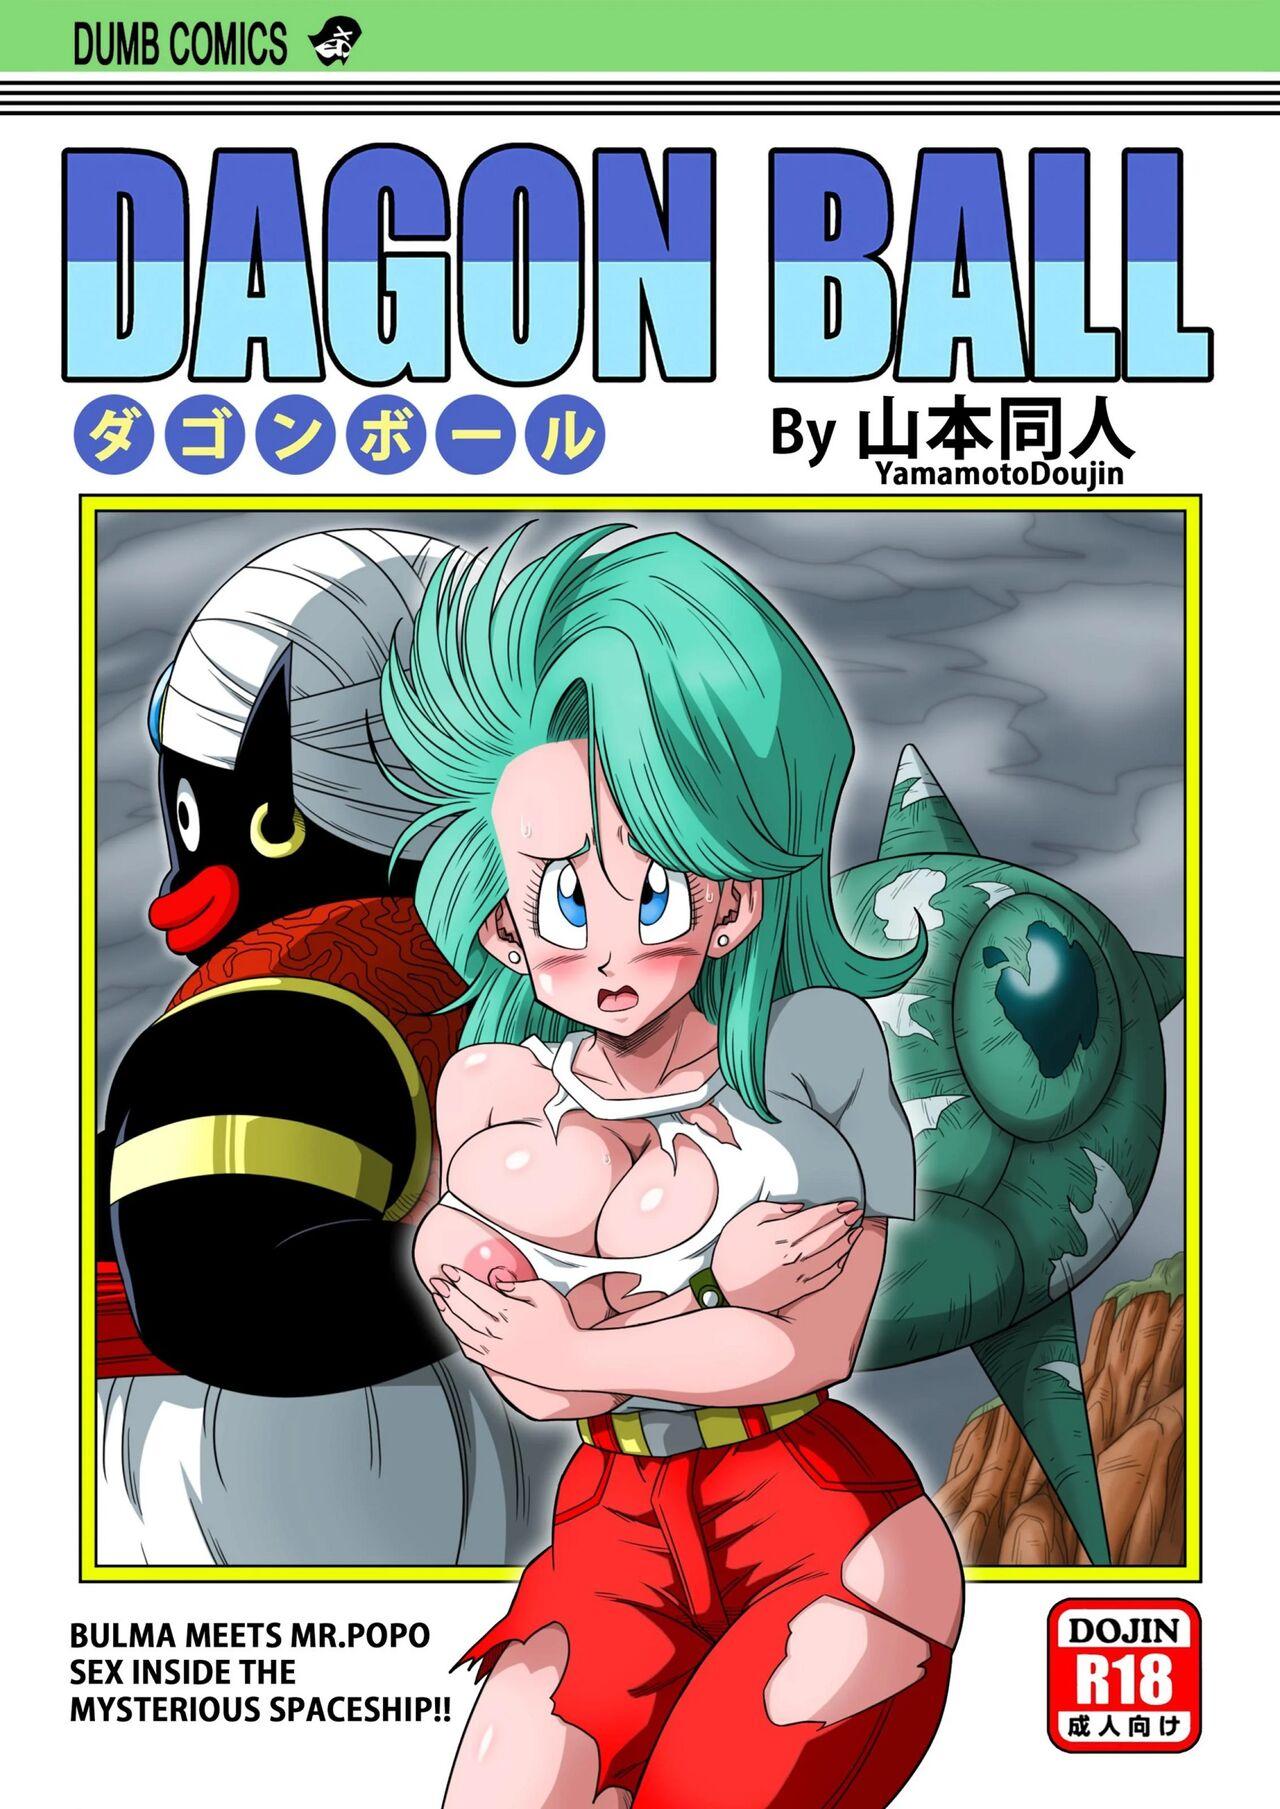 Blowing [Yamamoto] Dagon Ball - Bulma Meets Mr. Popo - Sex Inside the Mysterious Spaceship [English] (decensored) - Dragon ball z Japanese - Picture 1